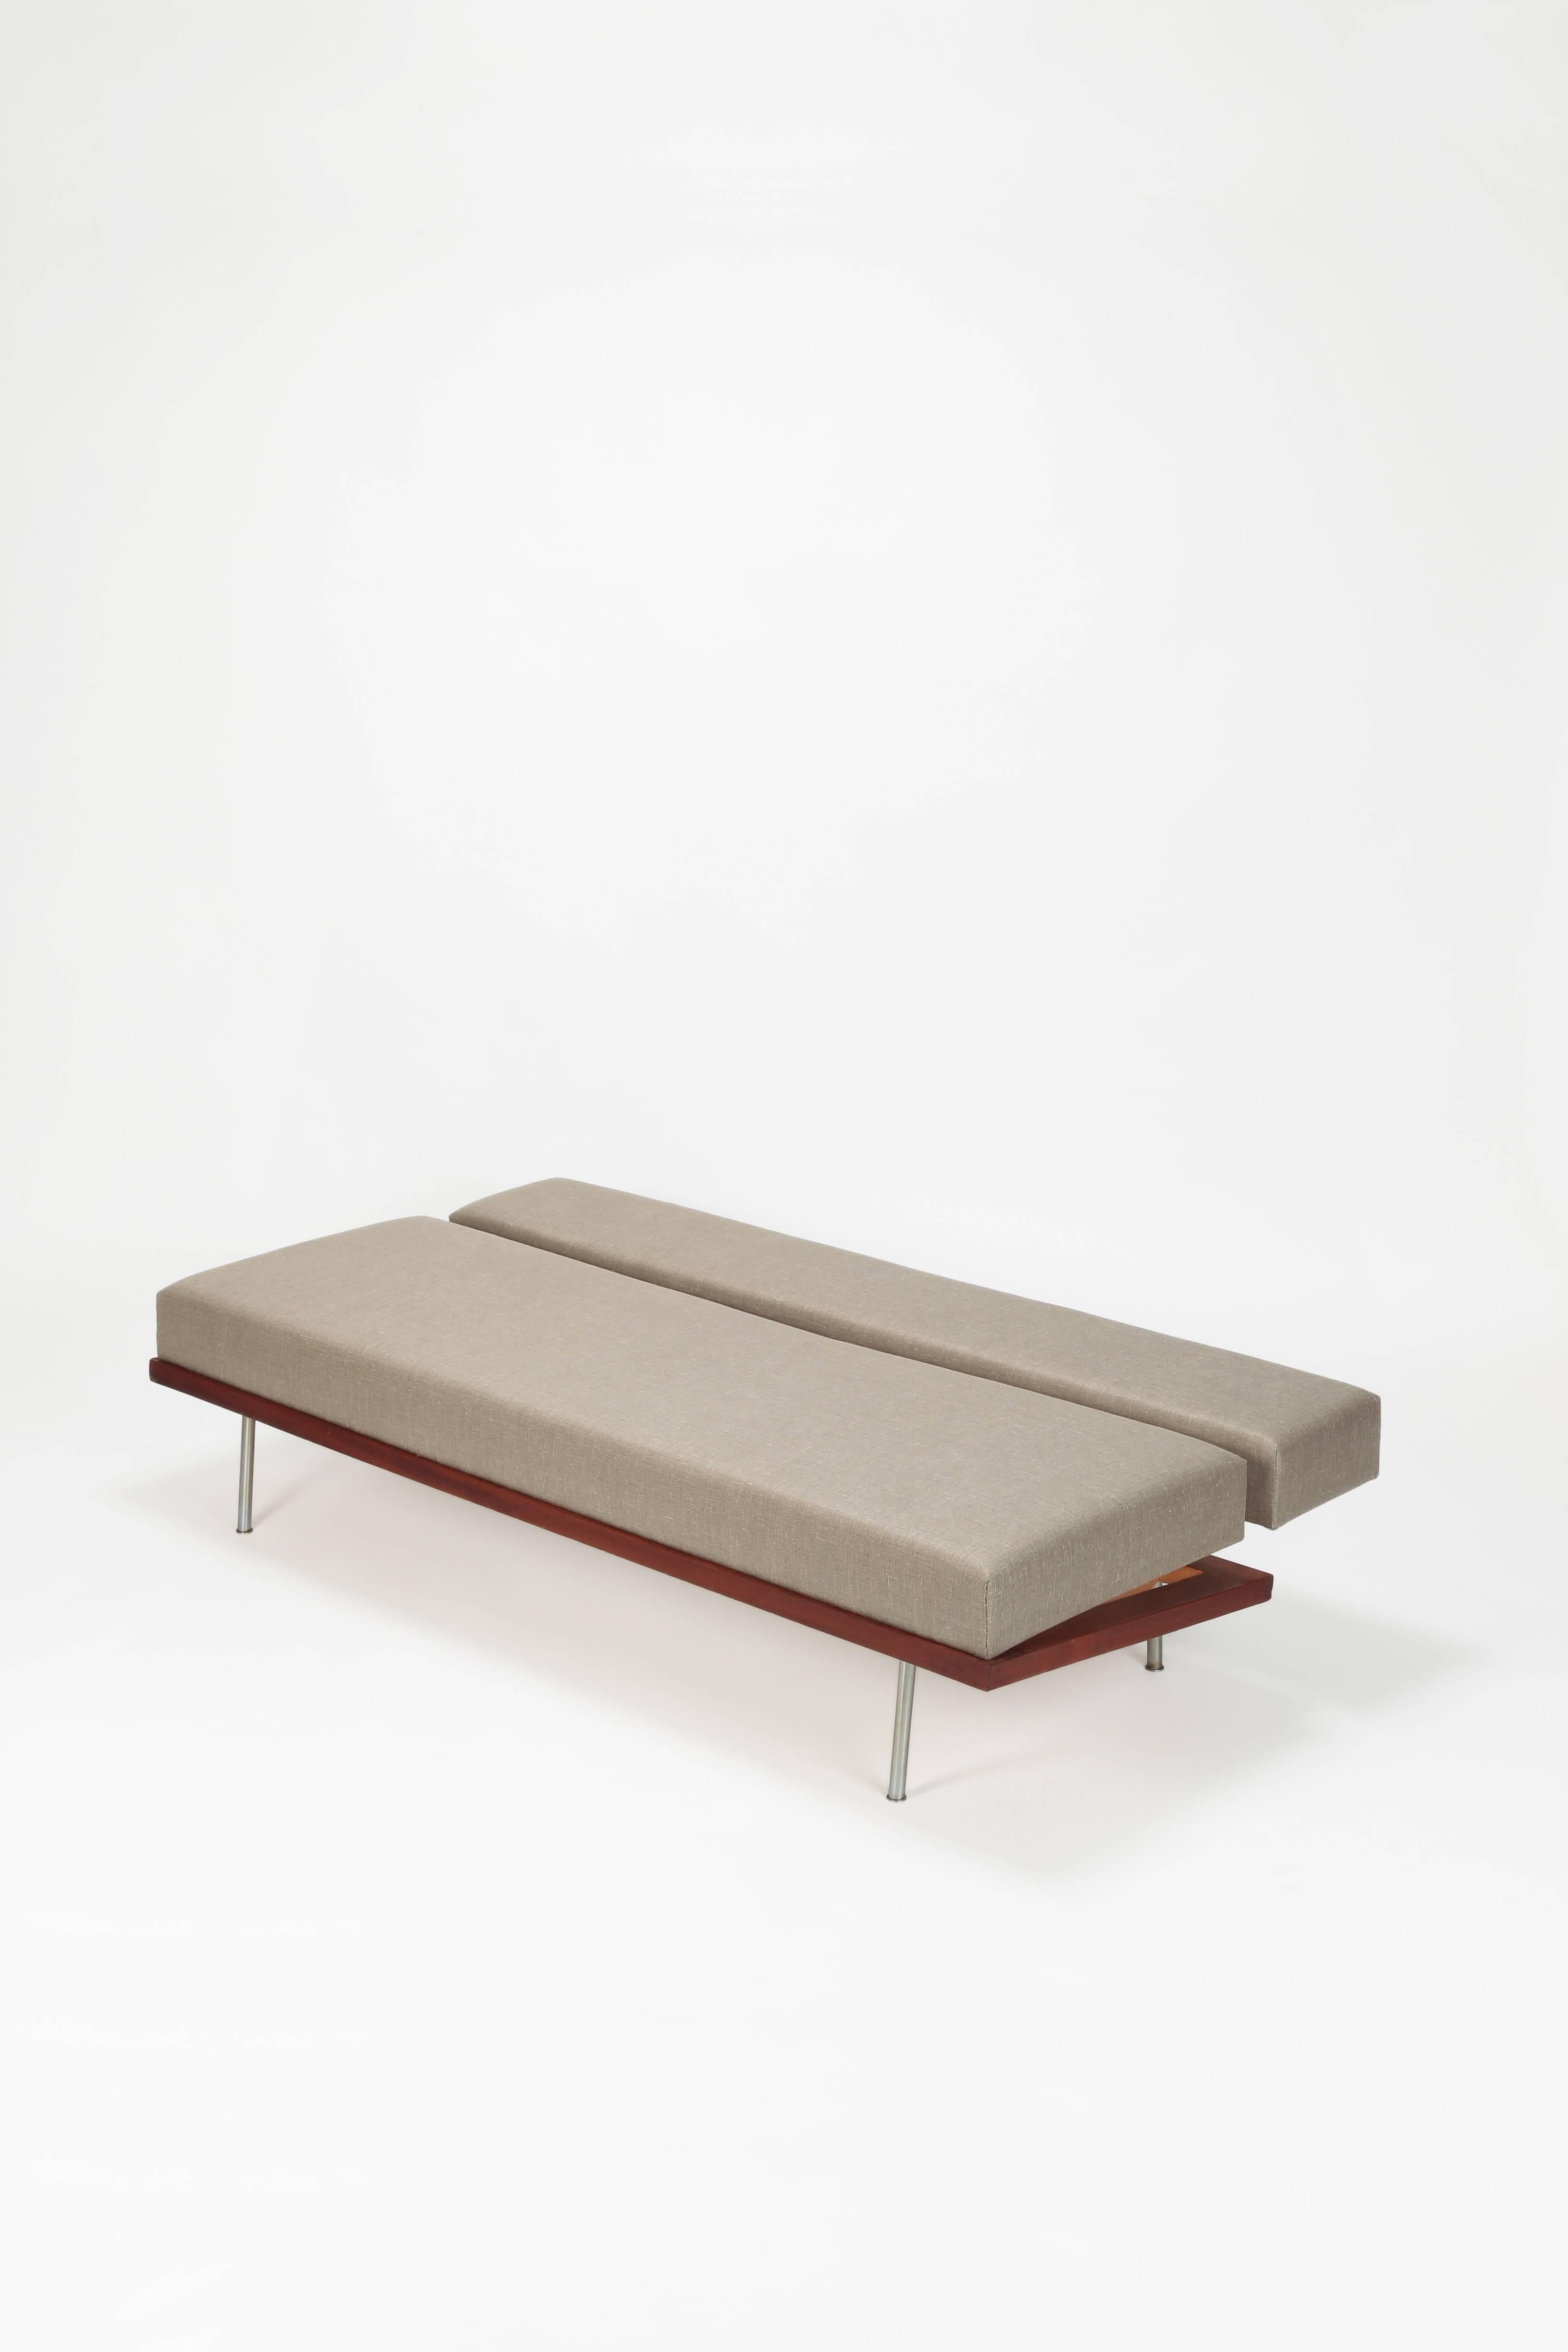 Hugo Peters daybed manufactured in Switzerland in the 1950s. The position of the back is adjustable, new upholstery covered with linen.